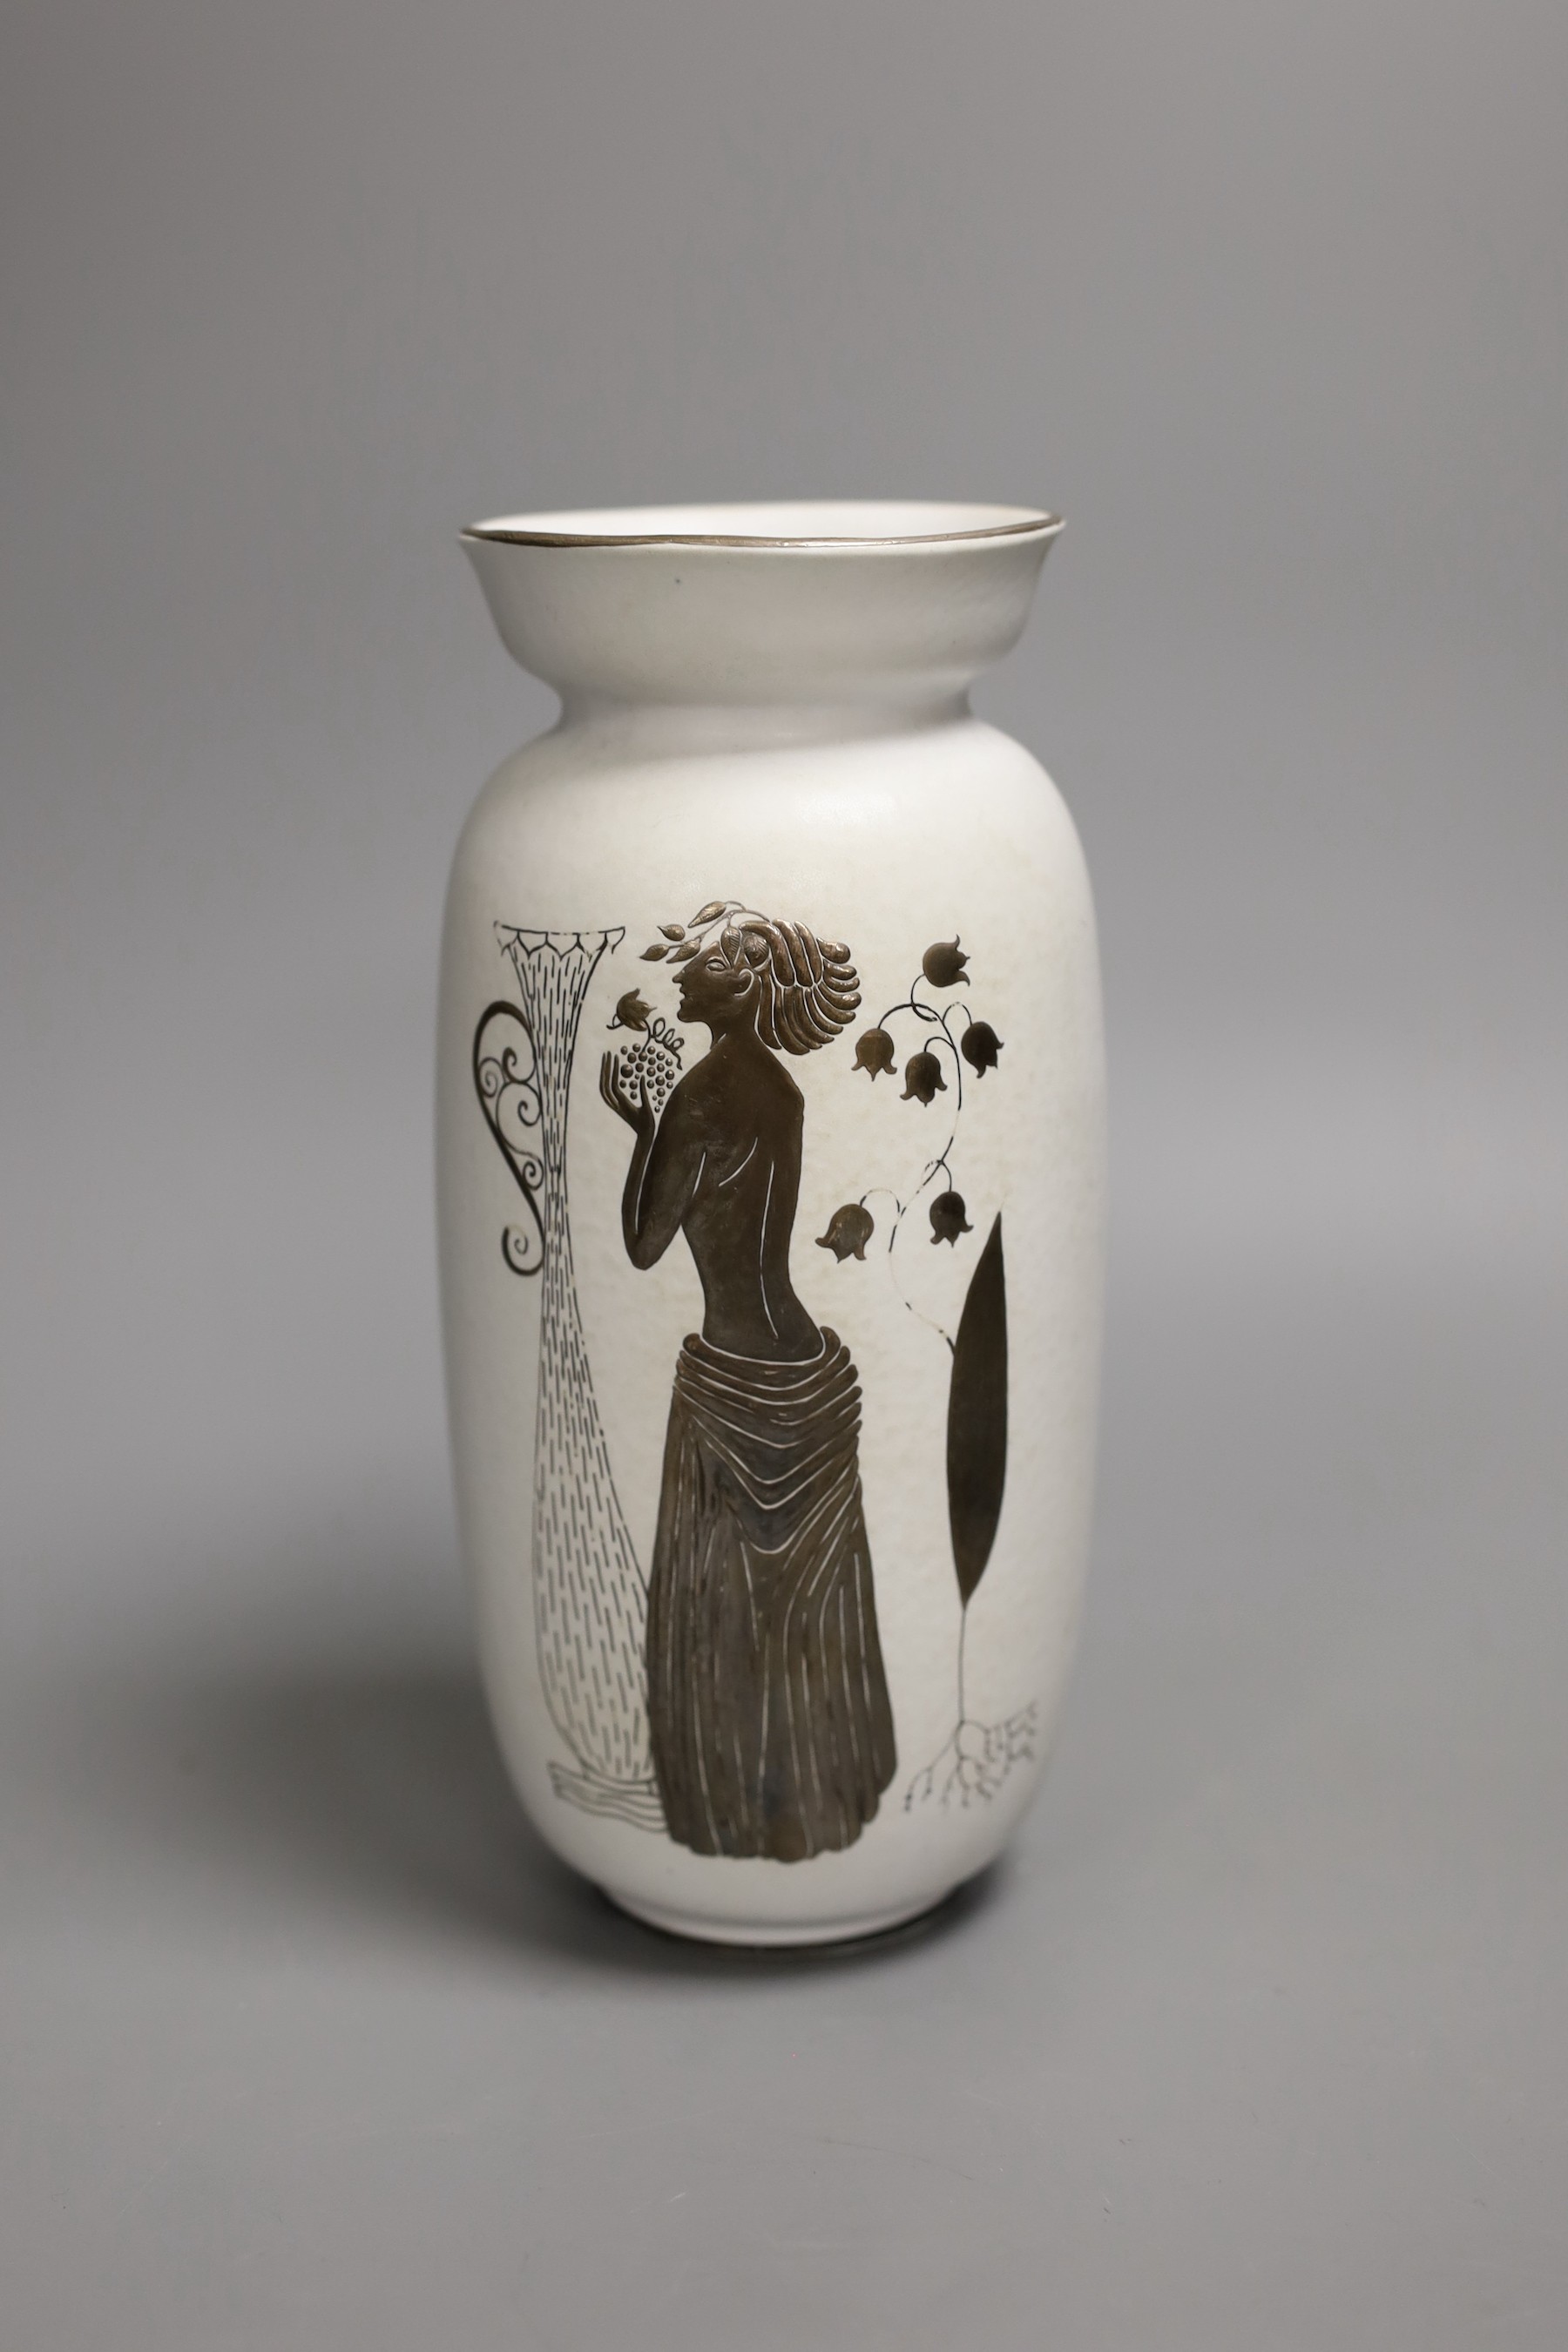 A Gustavsberg Stig Lindberg 215 shape Grazia vase decorated with a woman, vase and flowers, 20cm